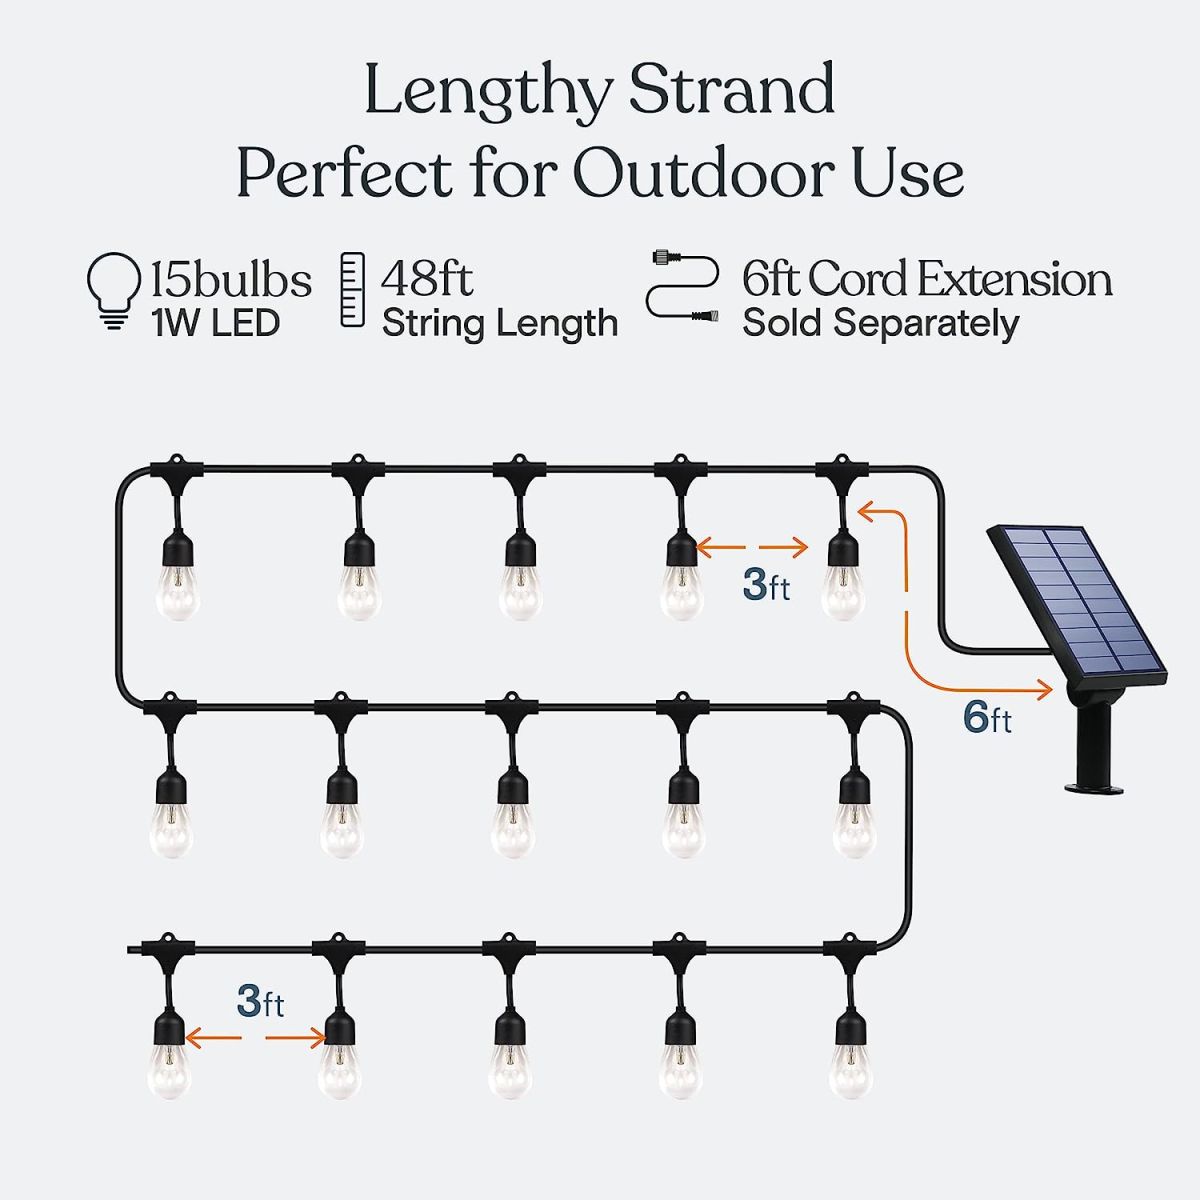 Pro Solar Powered Outdoor String Lights - Commercial Grade Waterproof Patio Lights with 48 Ft Edison Bulbs - Shatterproof LED Solar Outdoor String Lights - 1W LED, Soft White Light